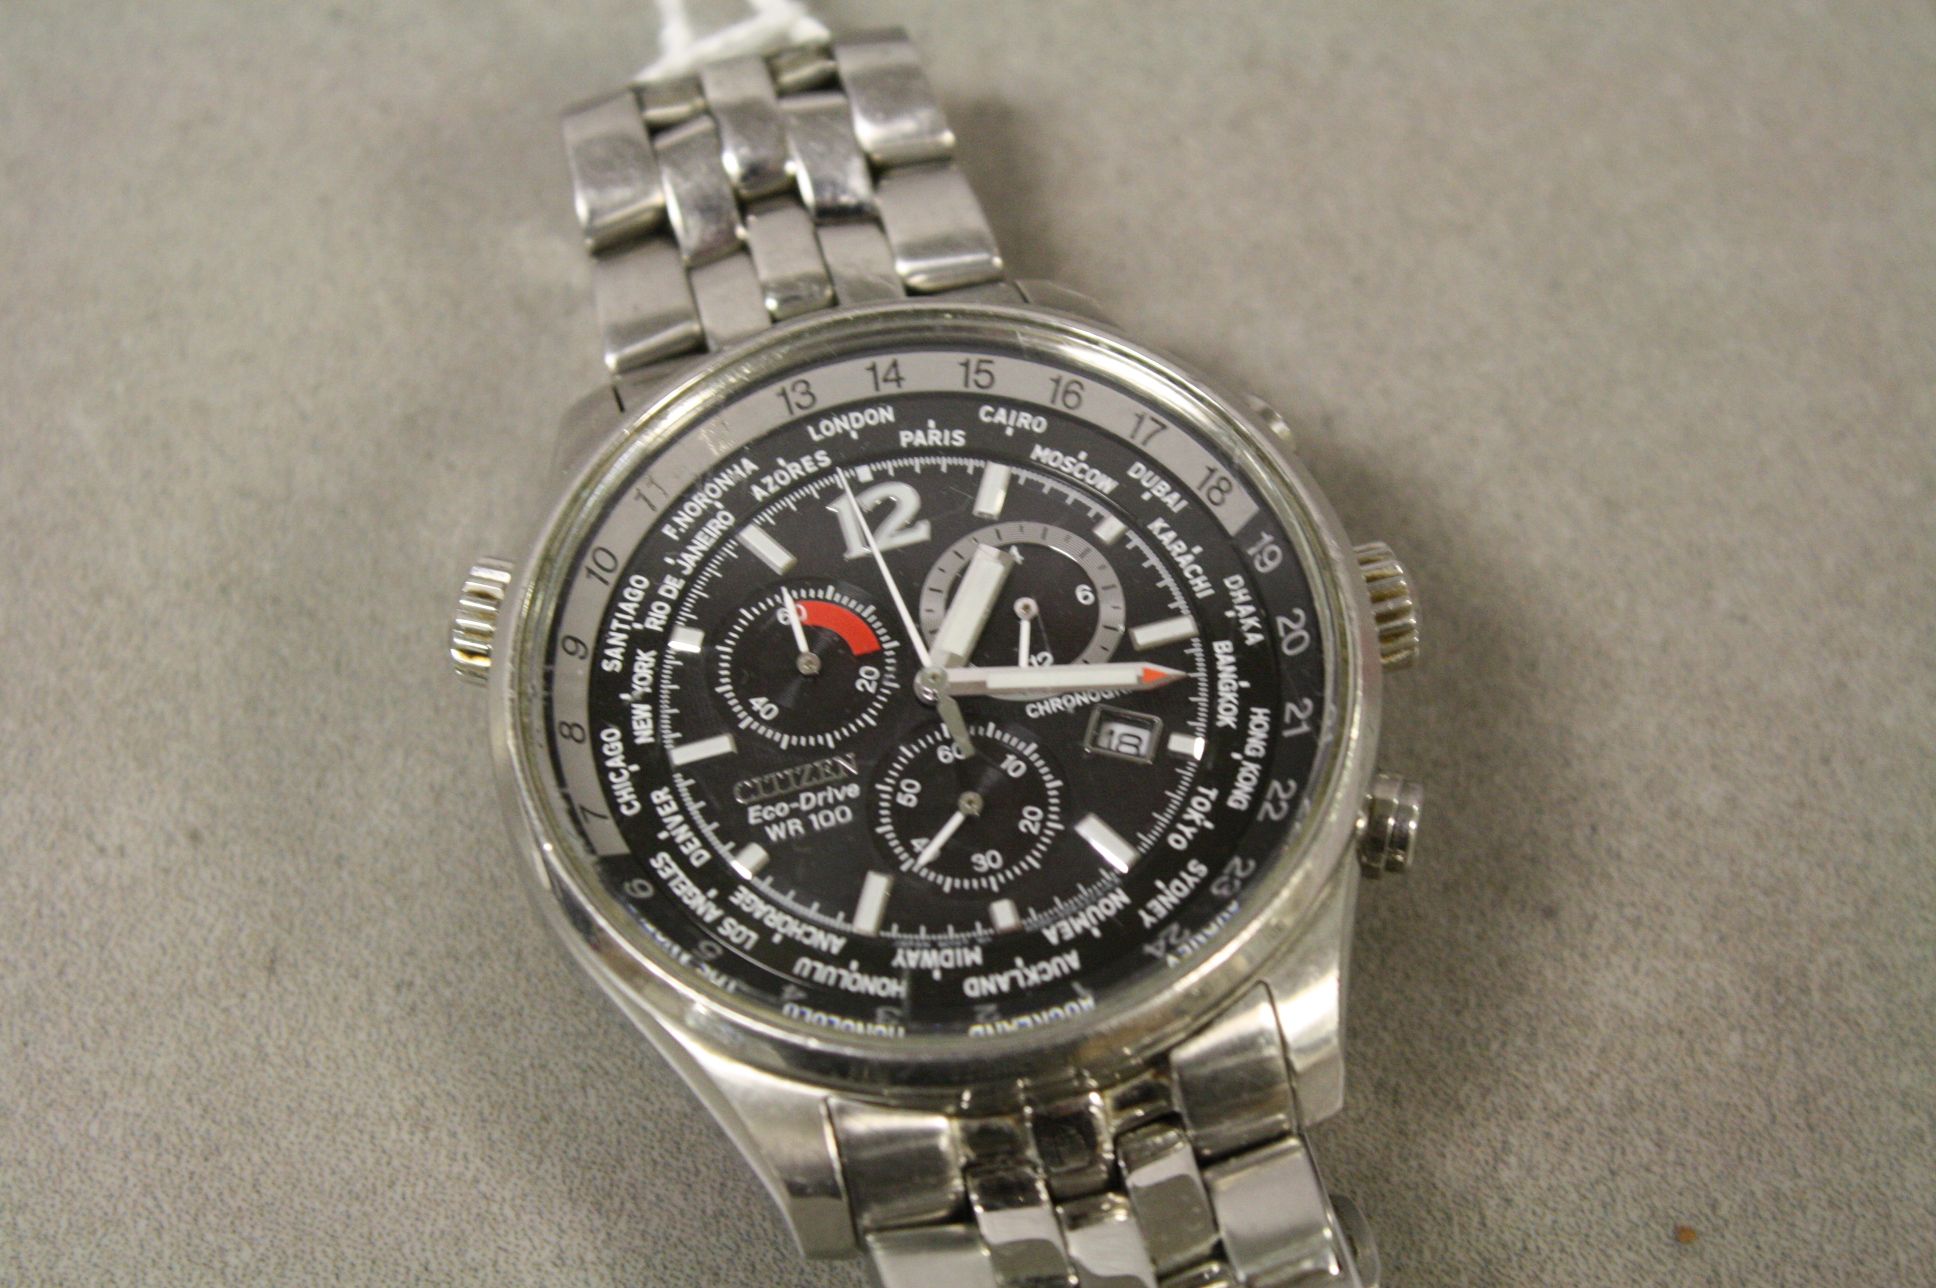 Citizen Eco Drive WR100 world time chronograph watch - Image 2 of 2